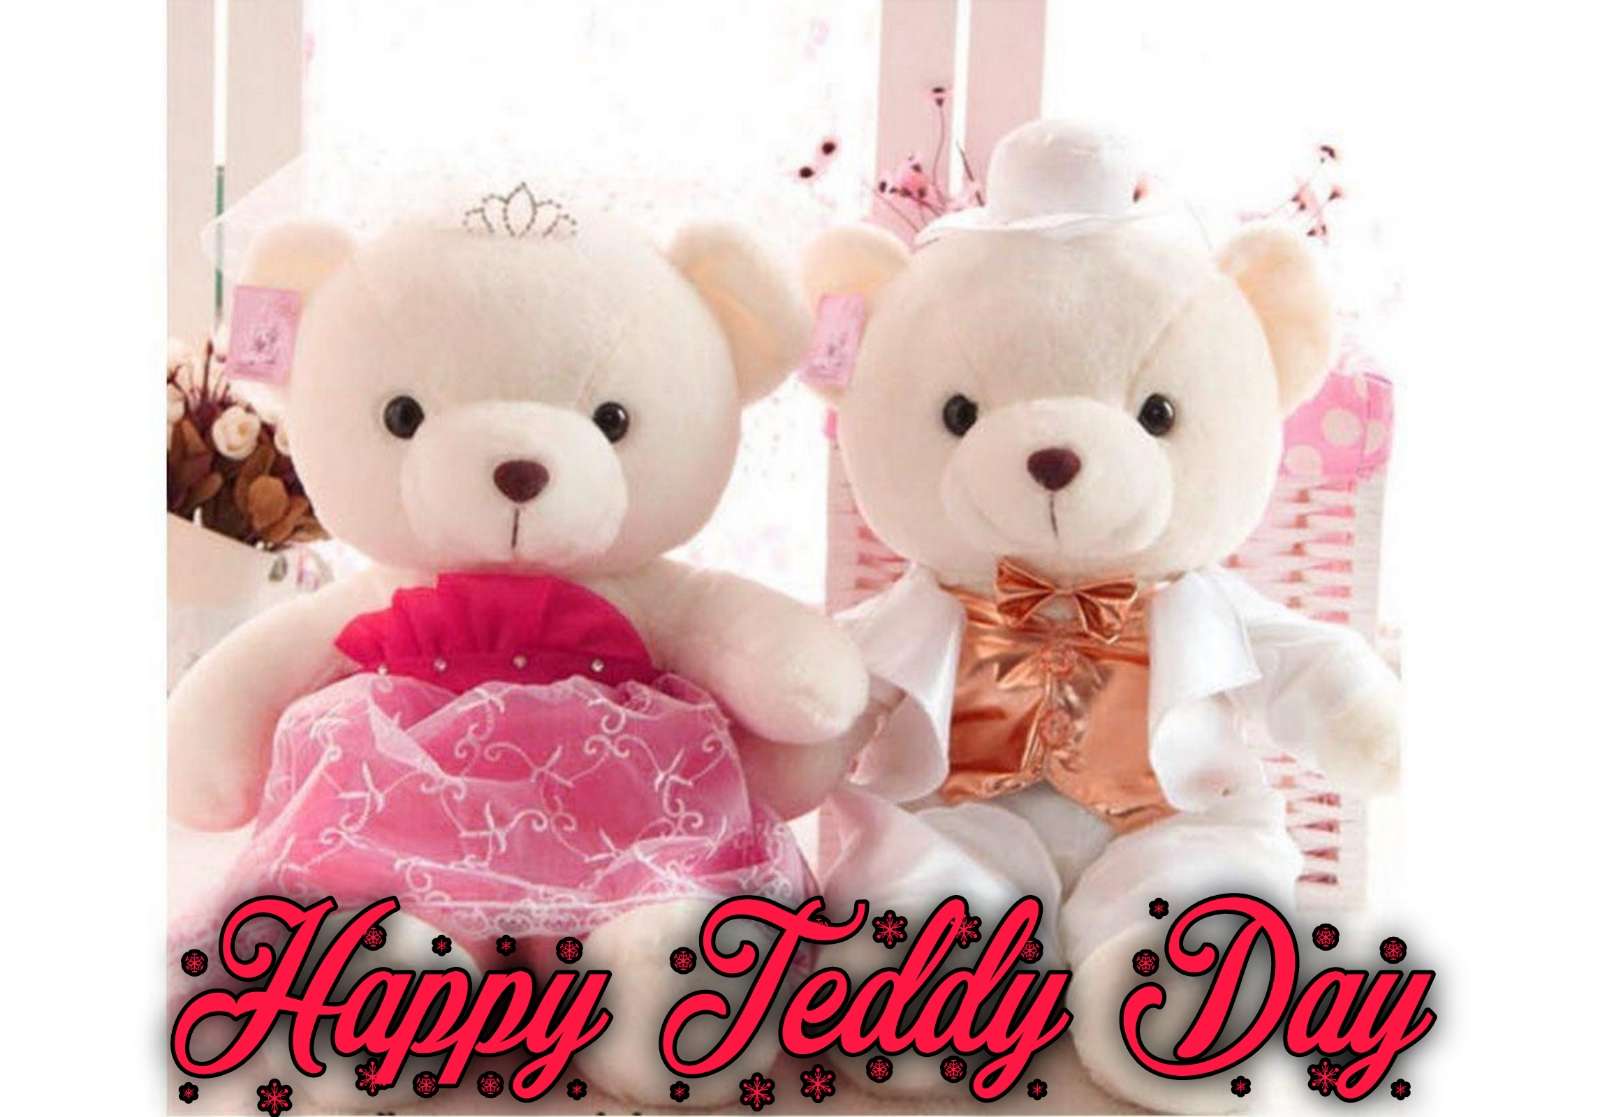 Happy Teddy Day Hd Images Download